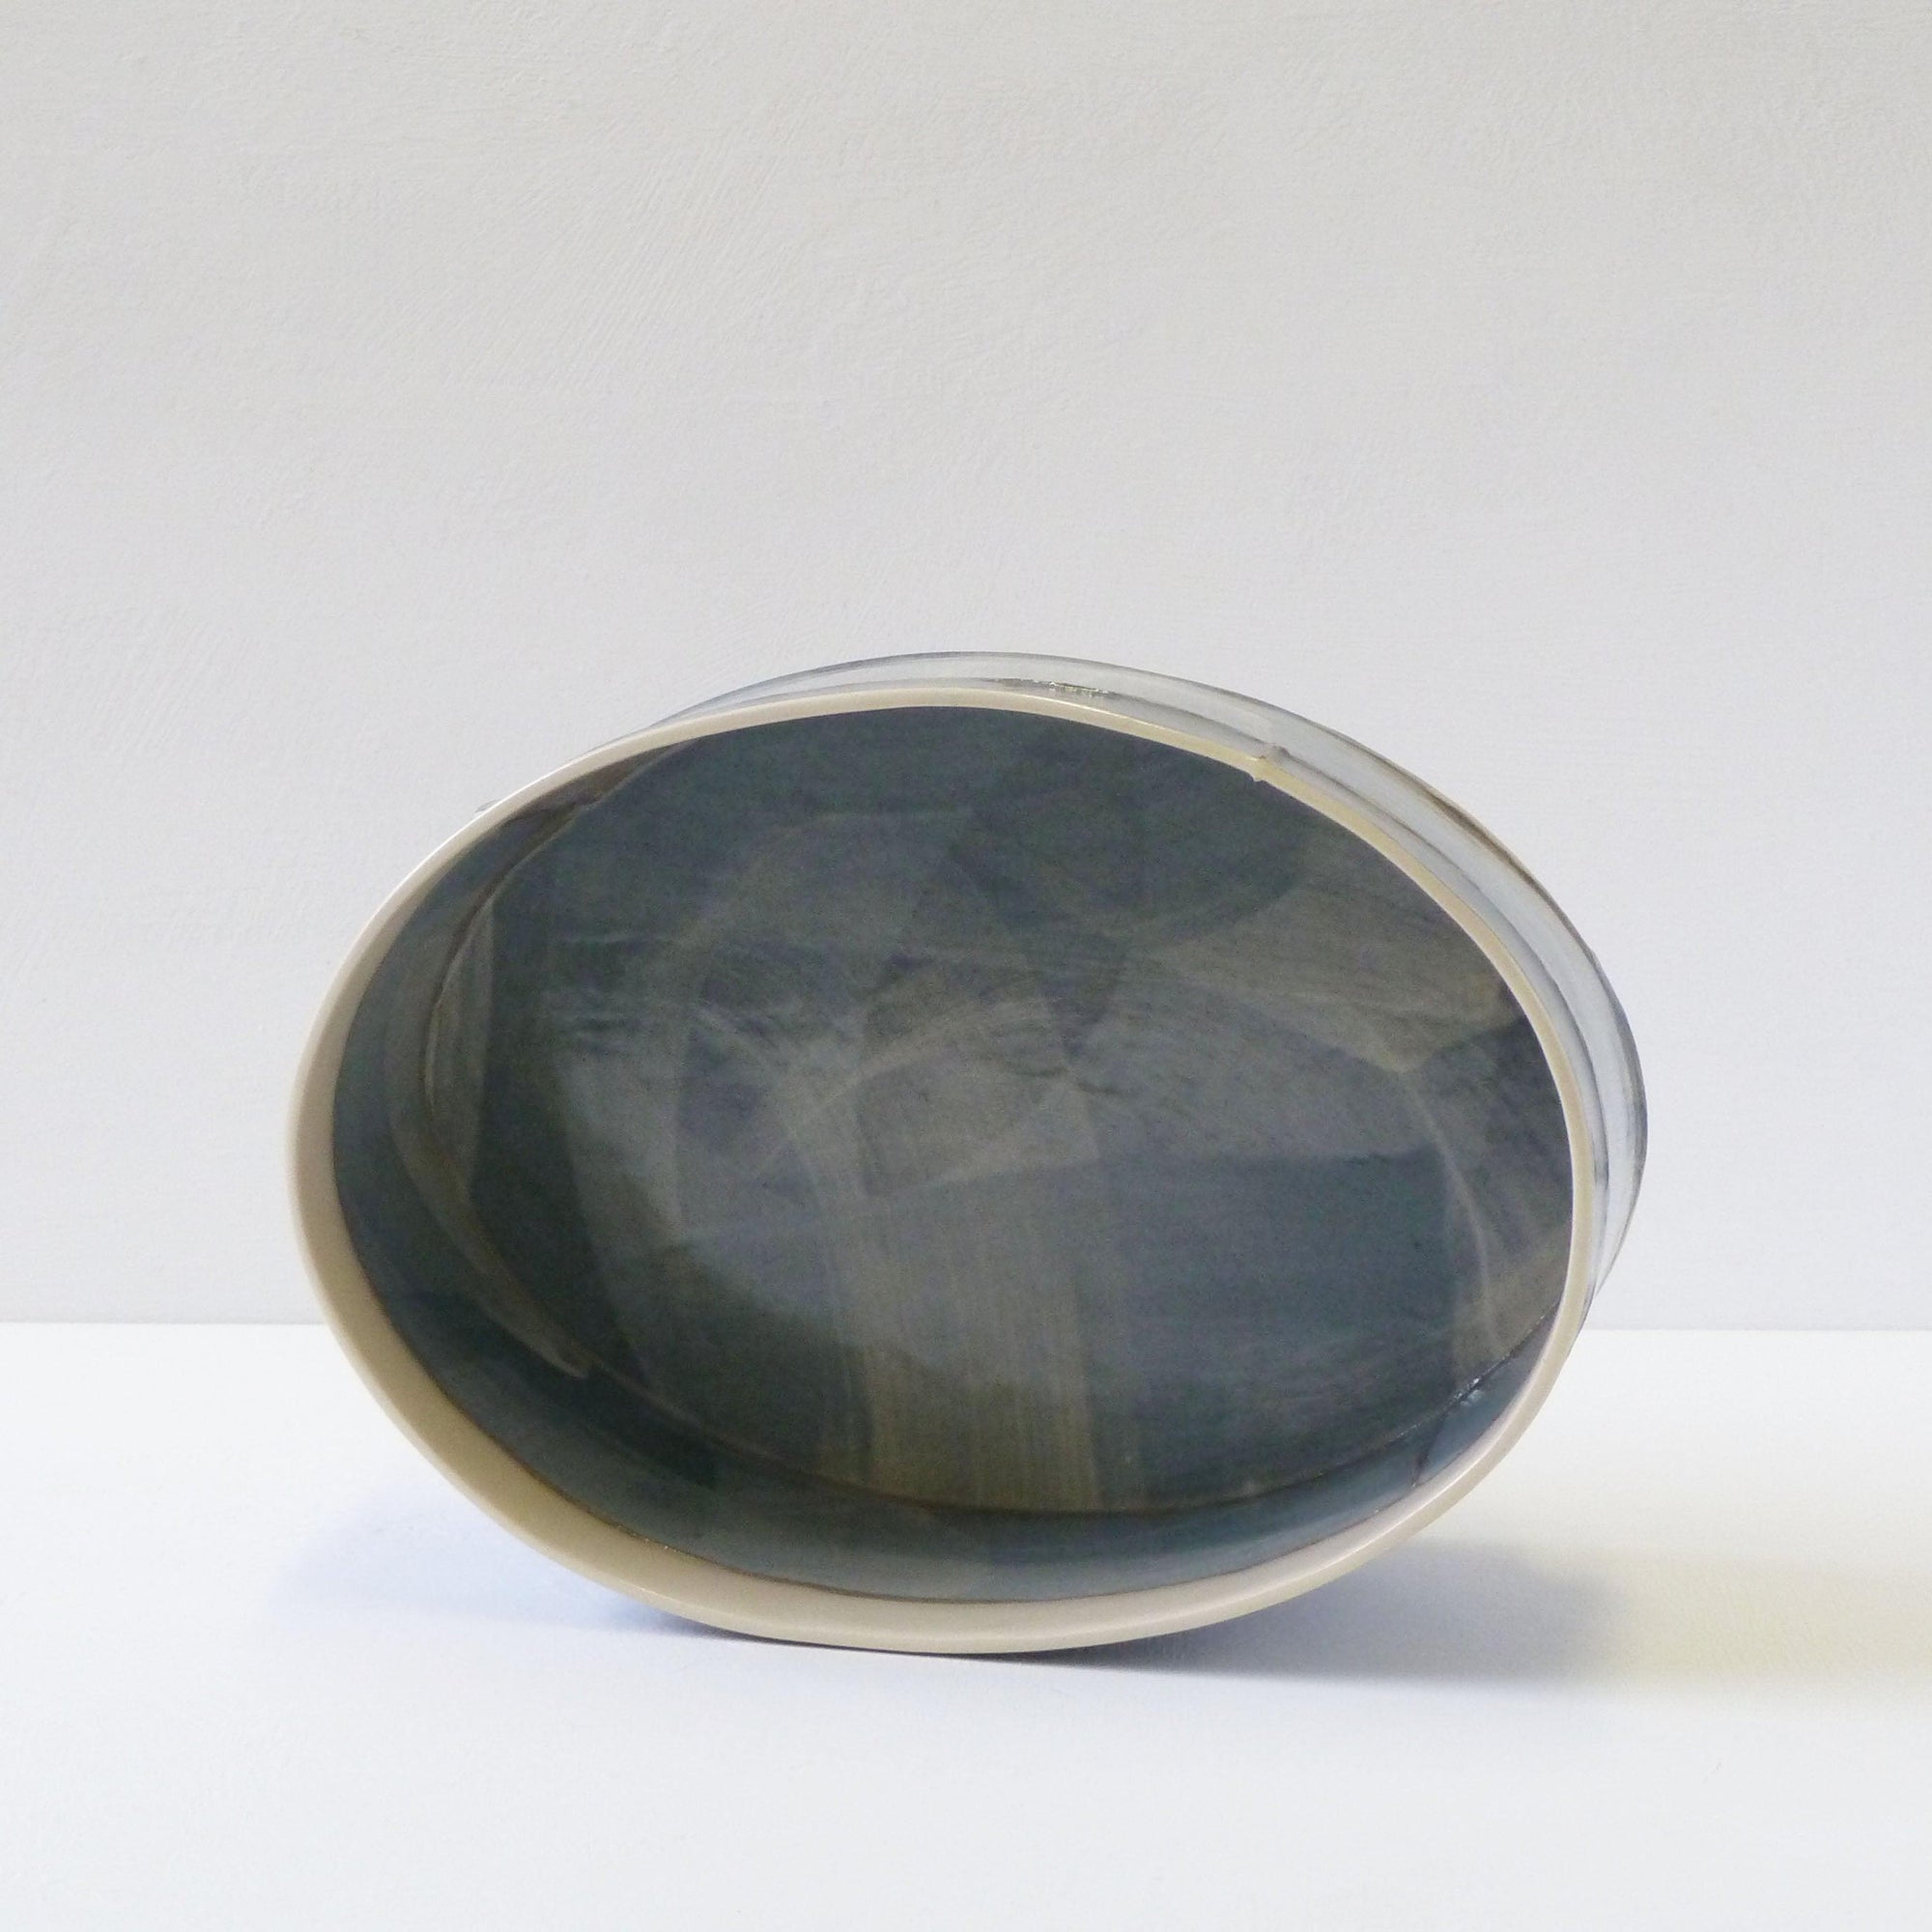 Short Oval Vessel (Sh.032) | Blue | handbuilt ceramic created by Emily-Kriste Wilcox, available from Padstow Gallery, Cornwall